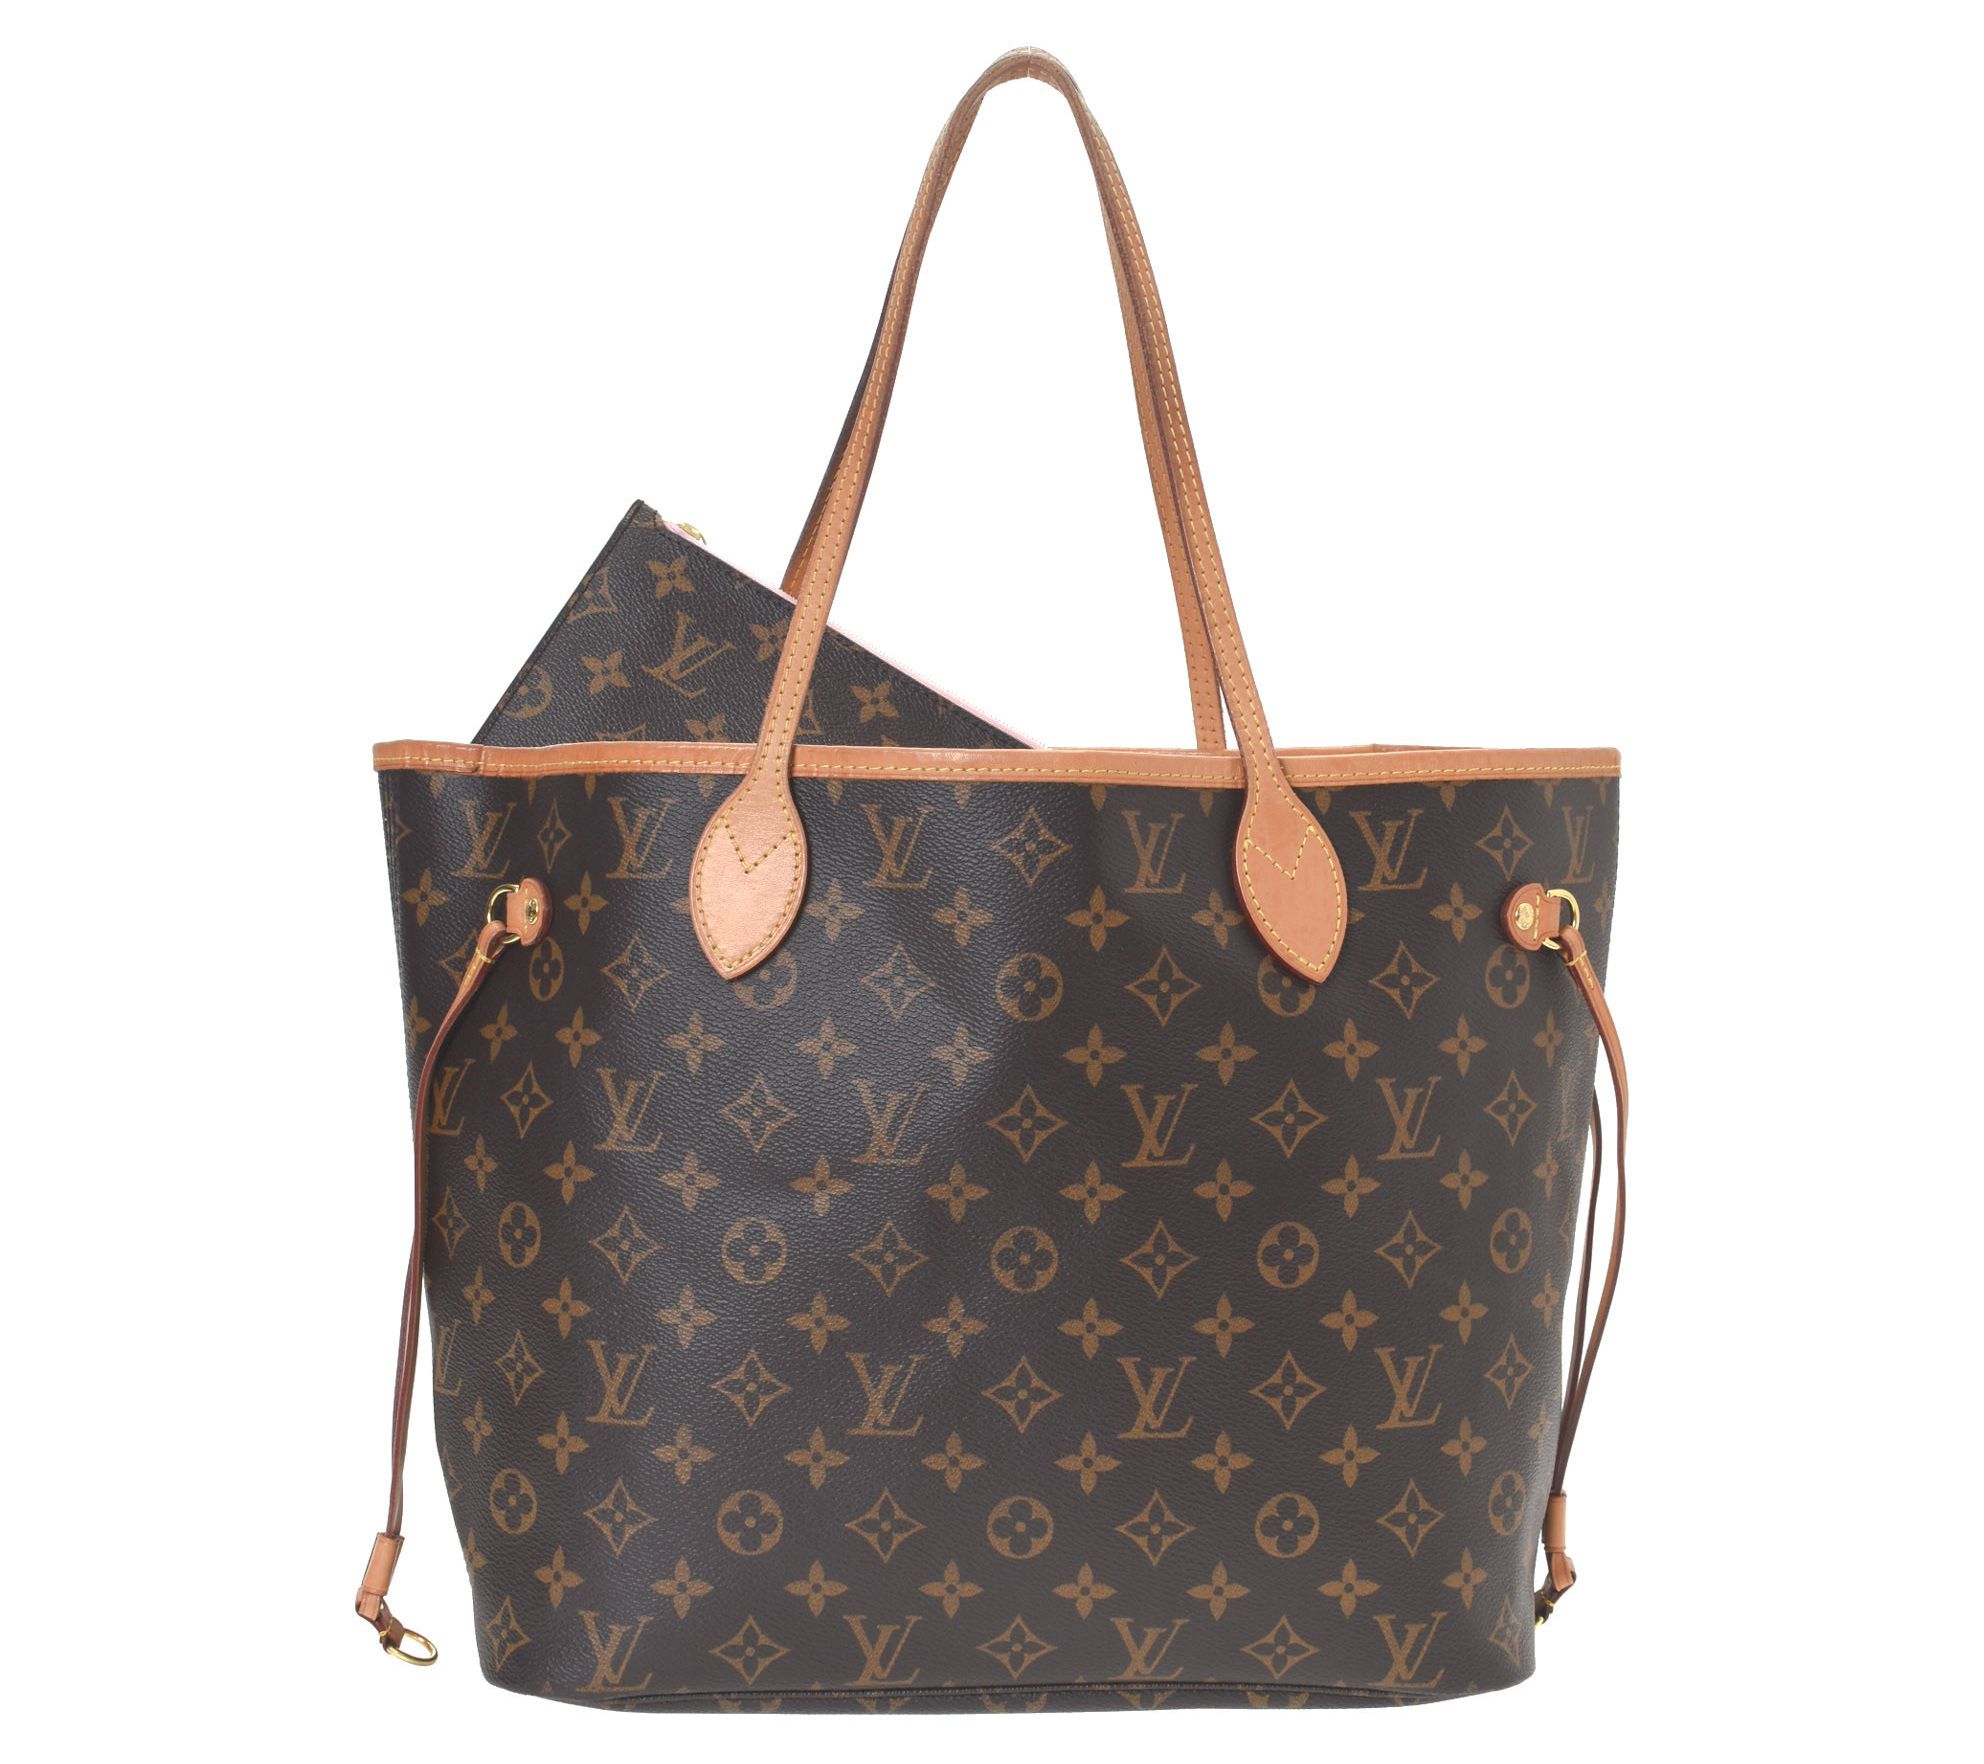 neverfull mm with pouch